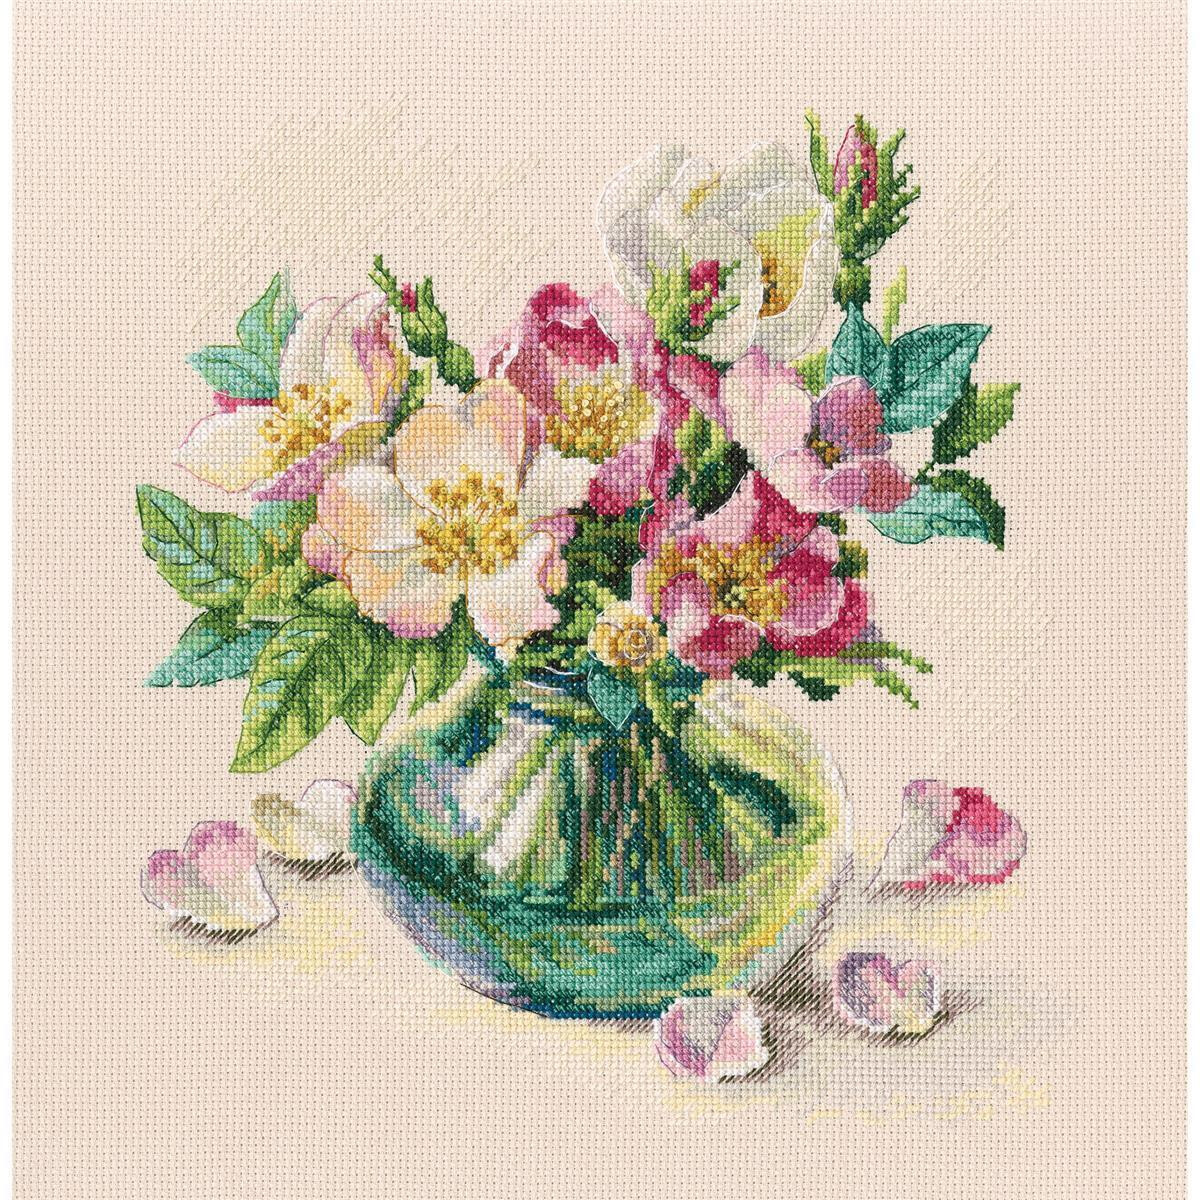 RTO counted Cross Stitch Kit "Tender briar...